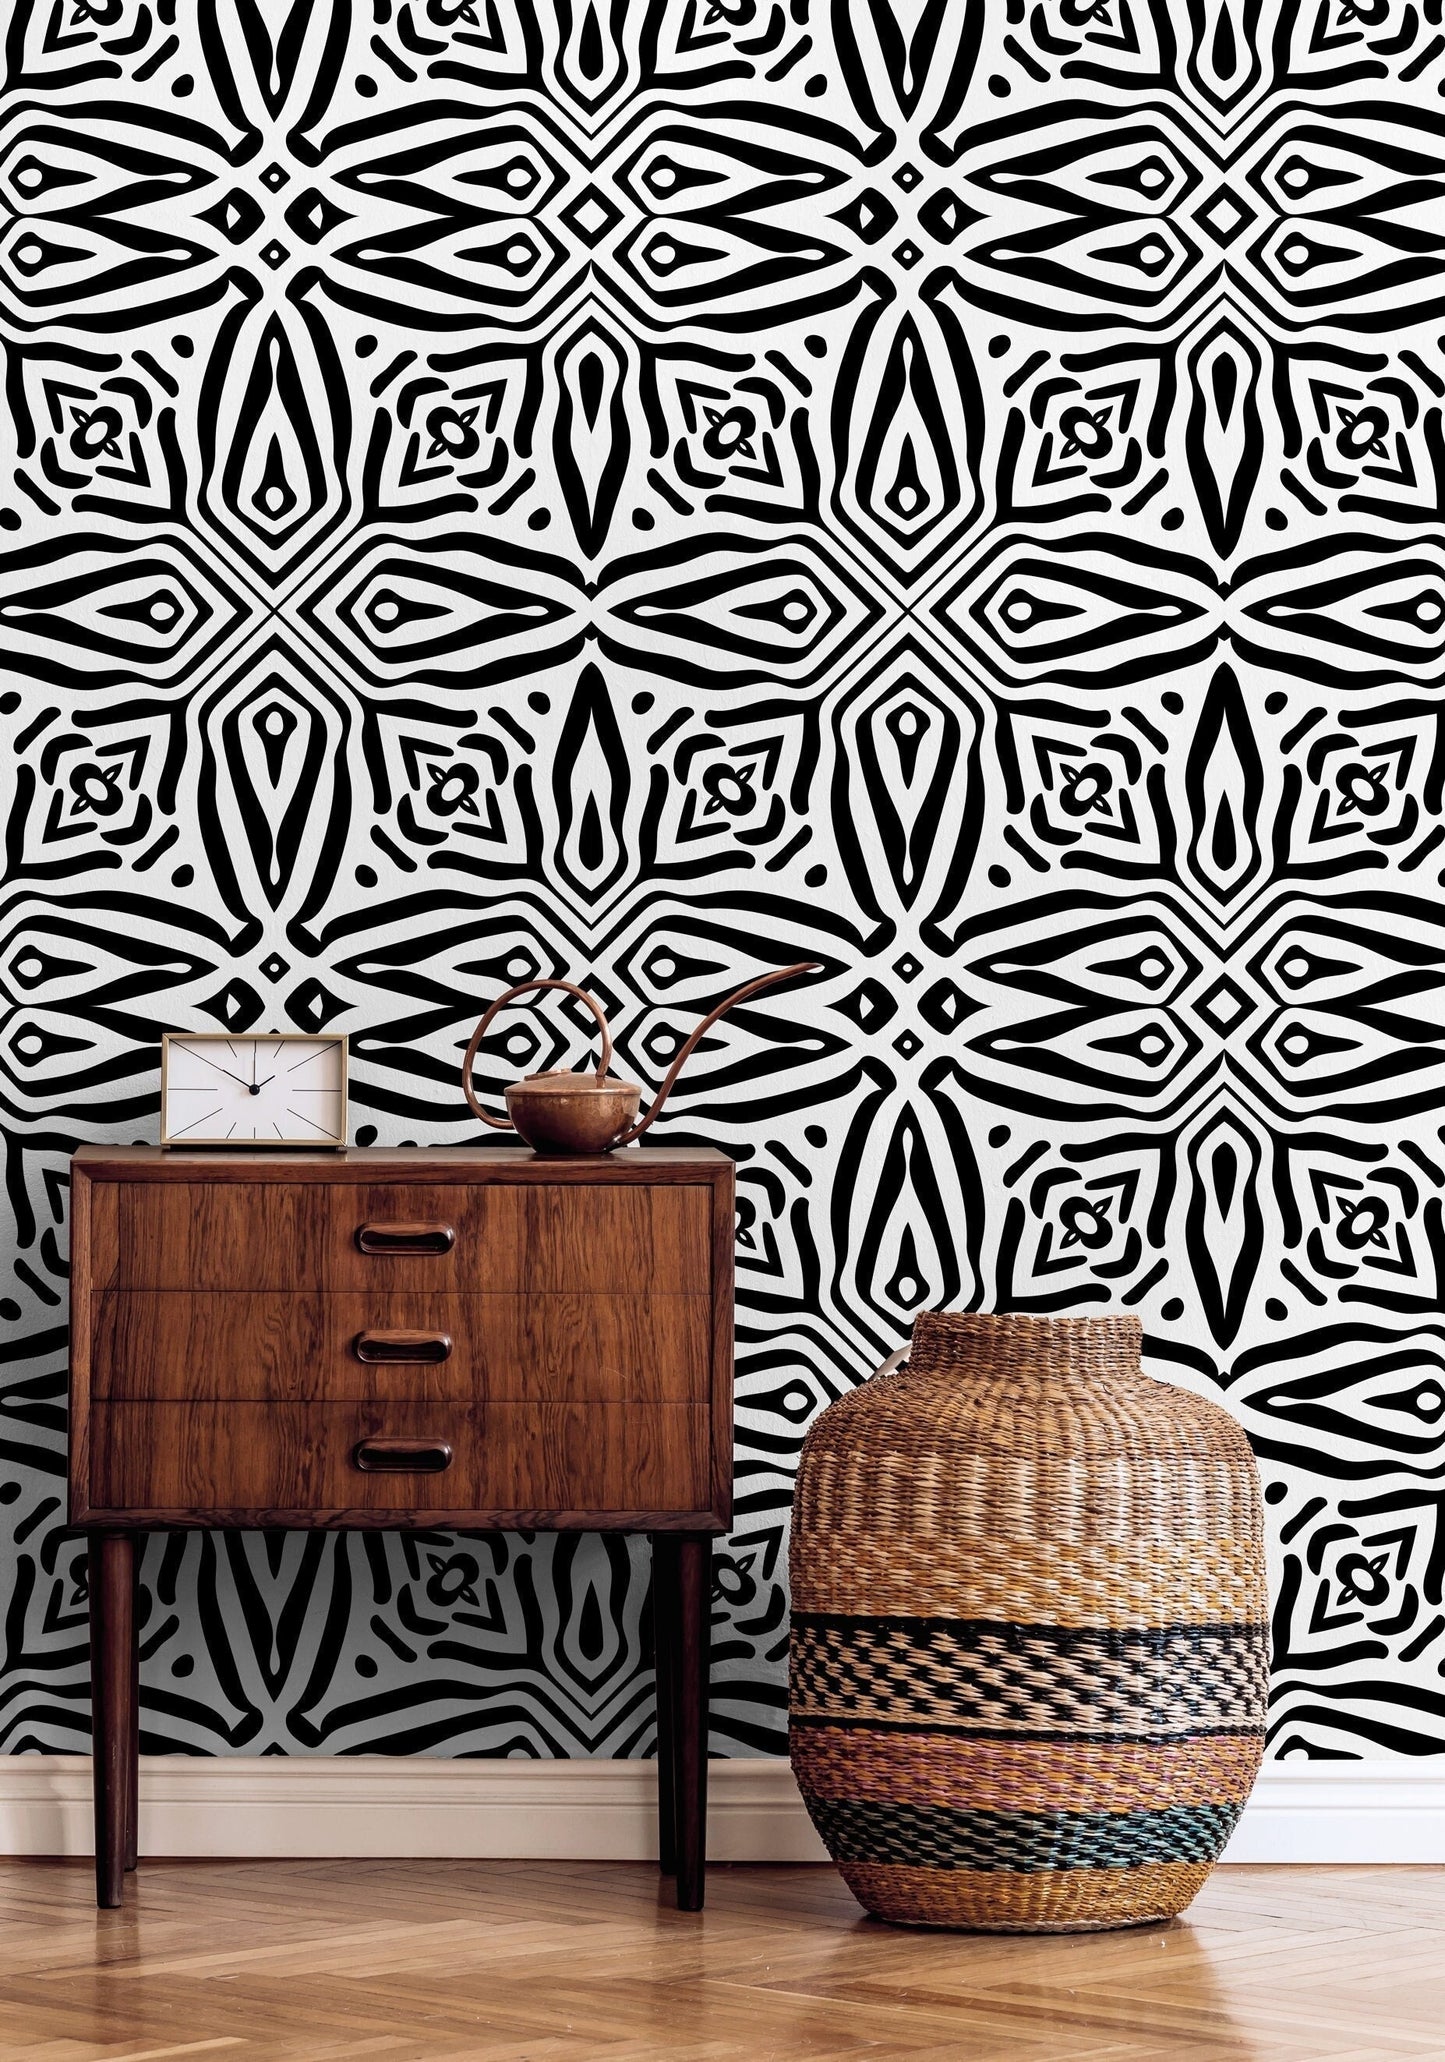 Wallpaper Peel and Stick Wallpaper Removable Wallpaper Home Decor Wall Art Wall Decor Room Decor / African Black and White Wallpaper - C392